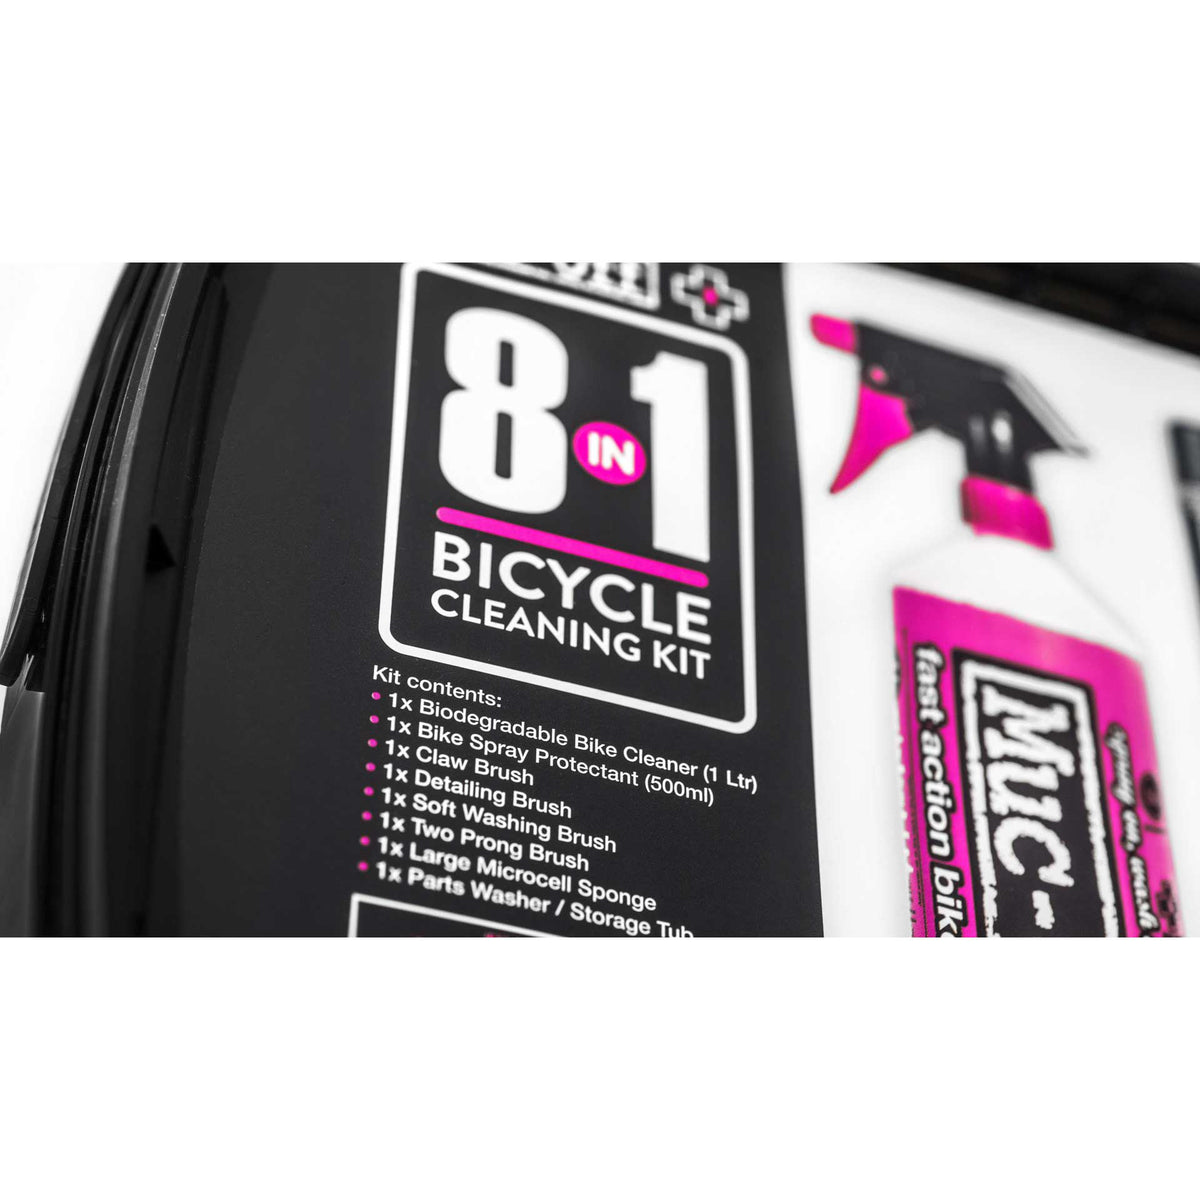 Muc-Off 8 in 1 Bicycle Cleaning Kit for sale online